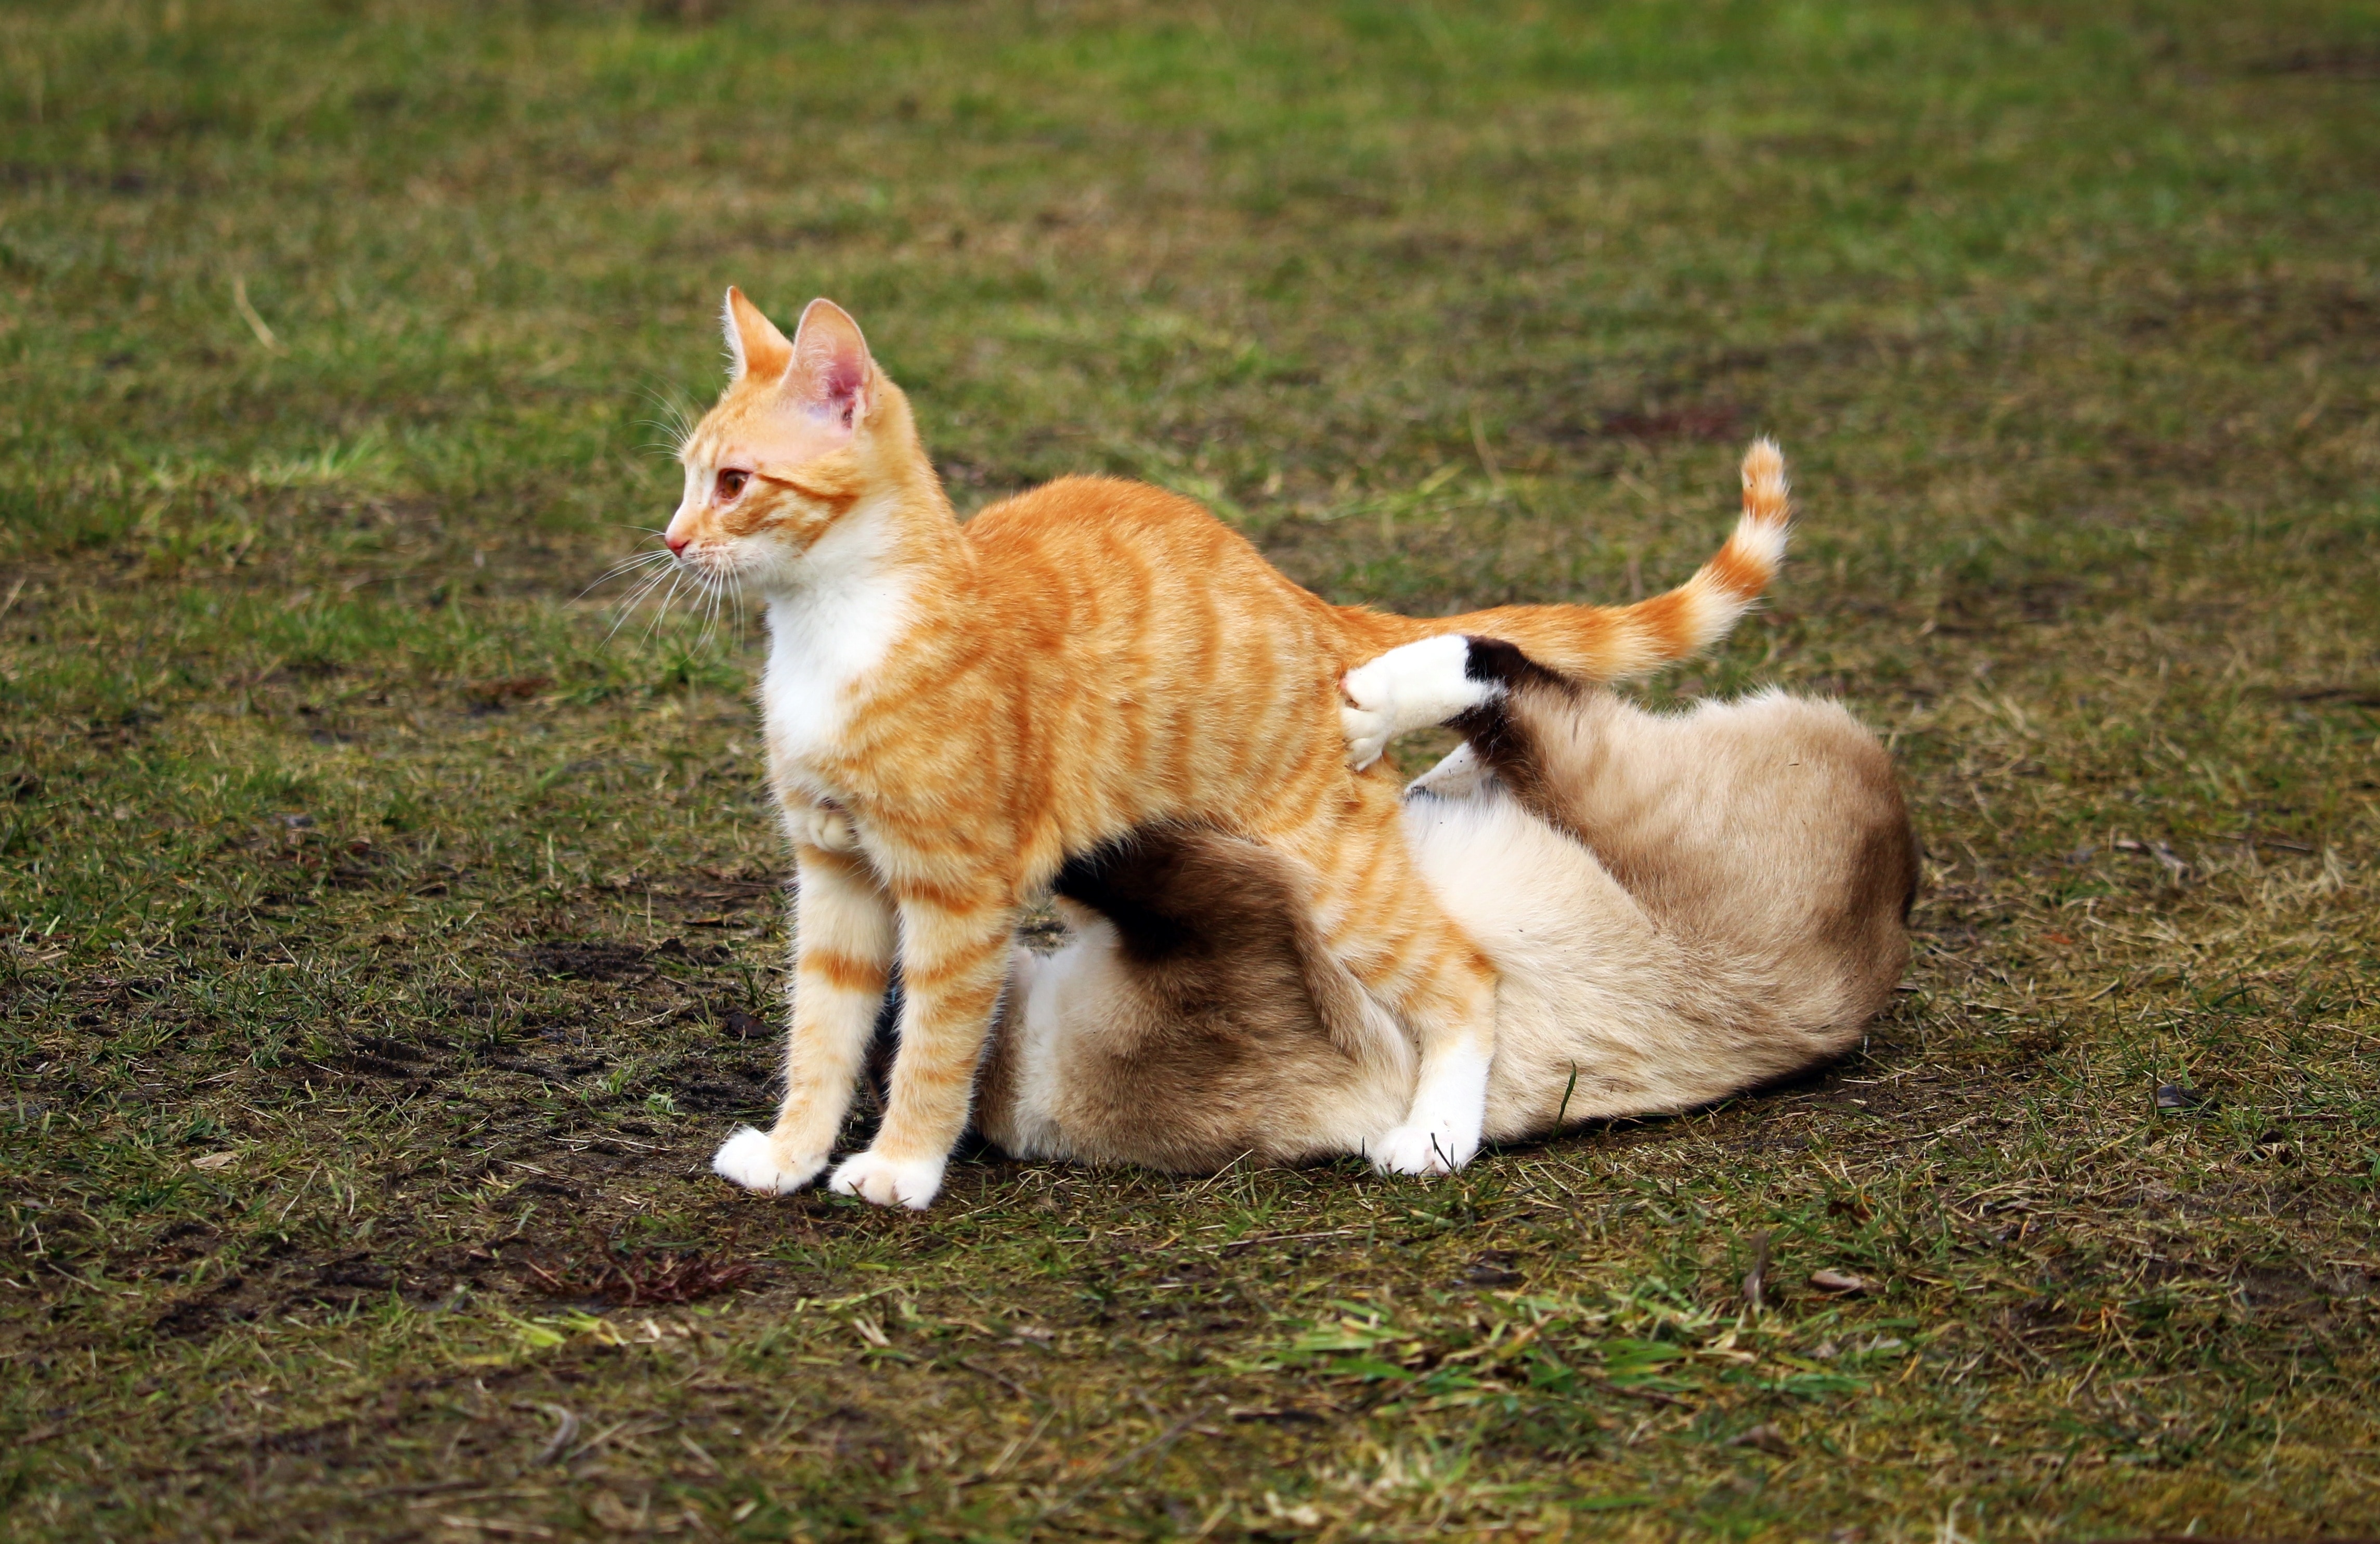 two cats playing on the ground free image - Peakpx